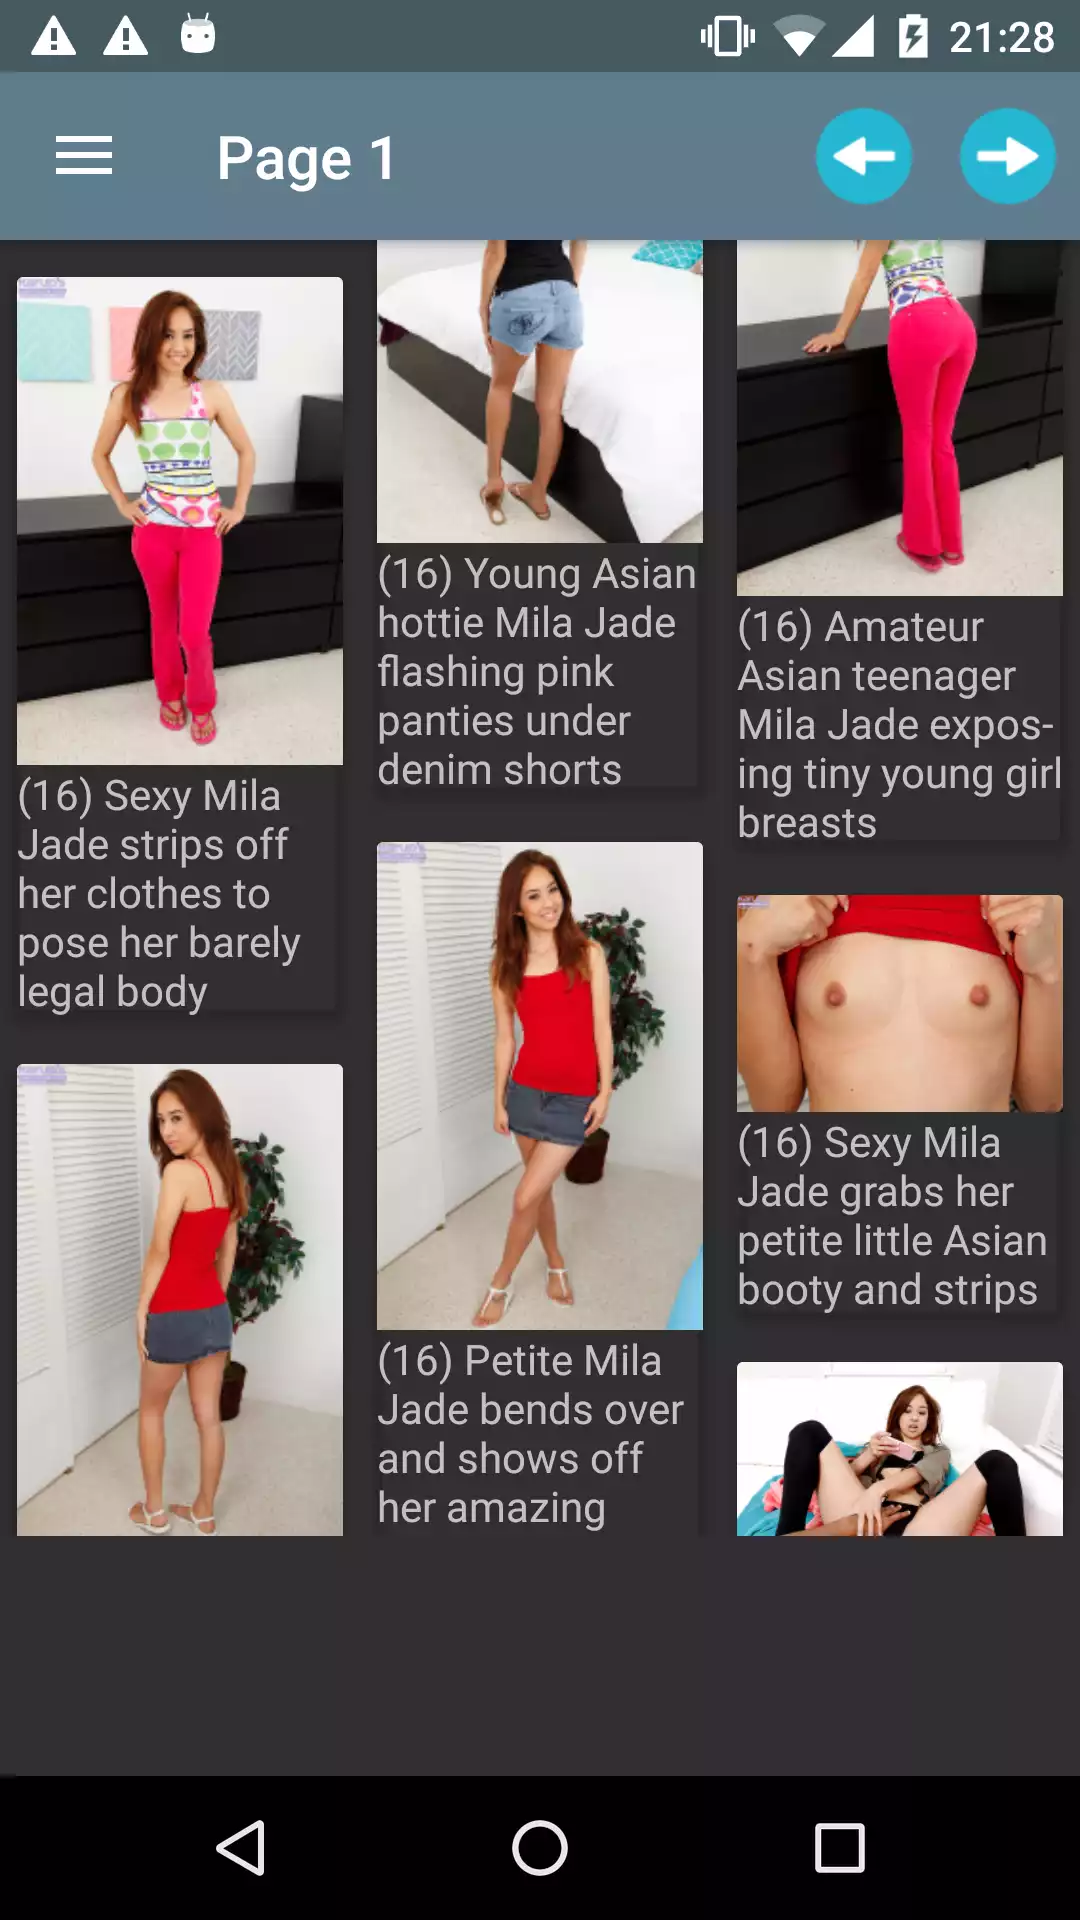 Mila Jade hot,apk,porn,photos,تطبيق,hentai,sexy,pics,ster,gallery,free,mobile,هنتاي,picture,galleries,caprice,pict,hentia,صور,apps,photo,pucs,android